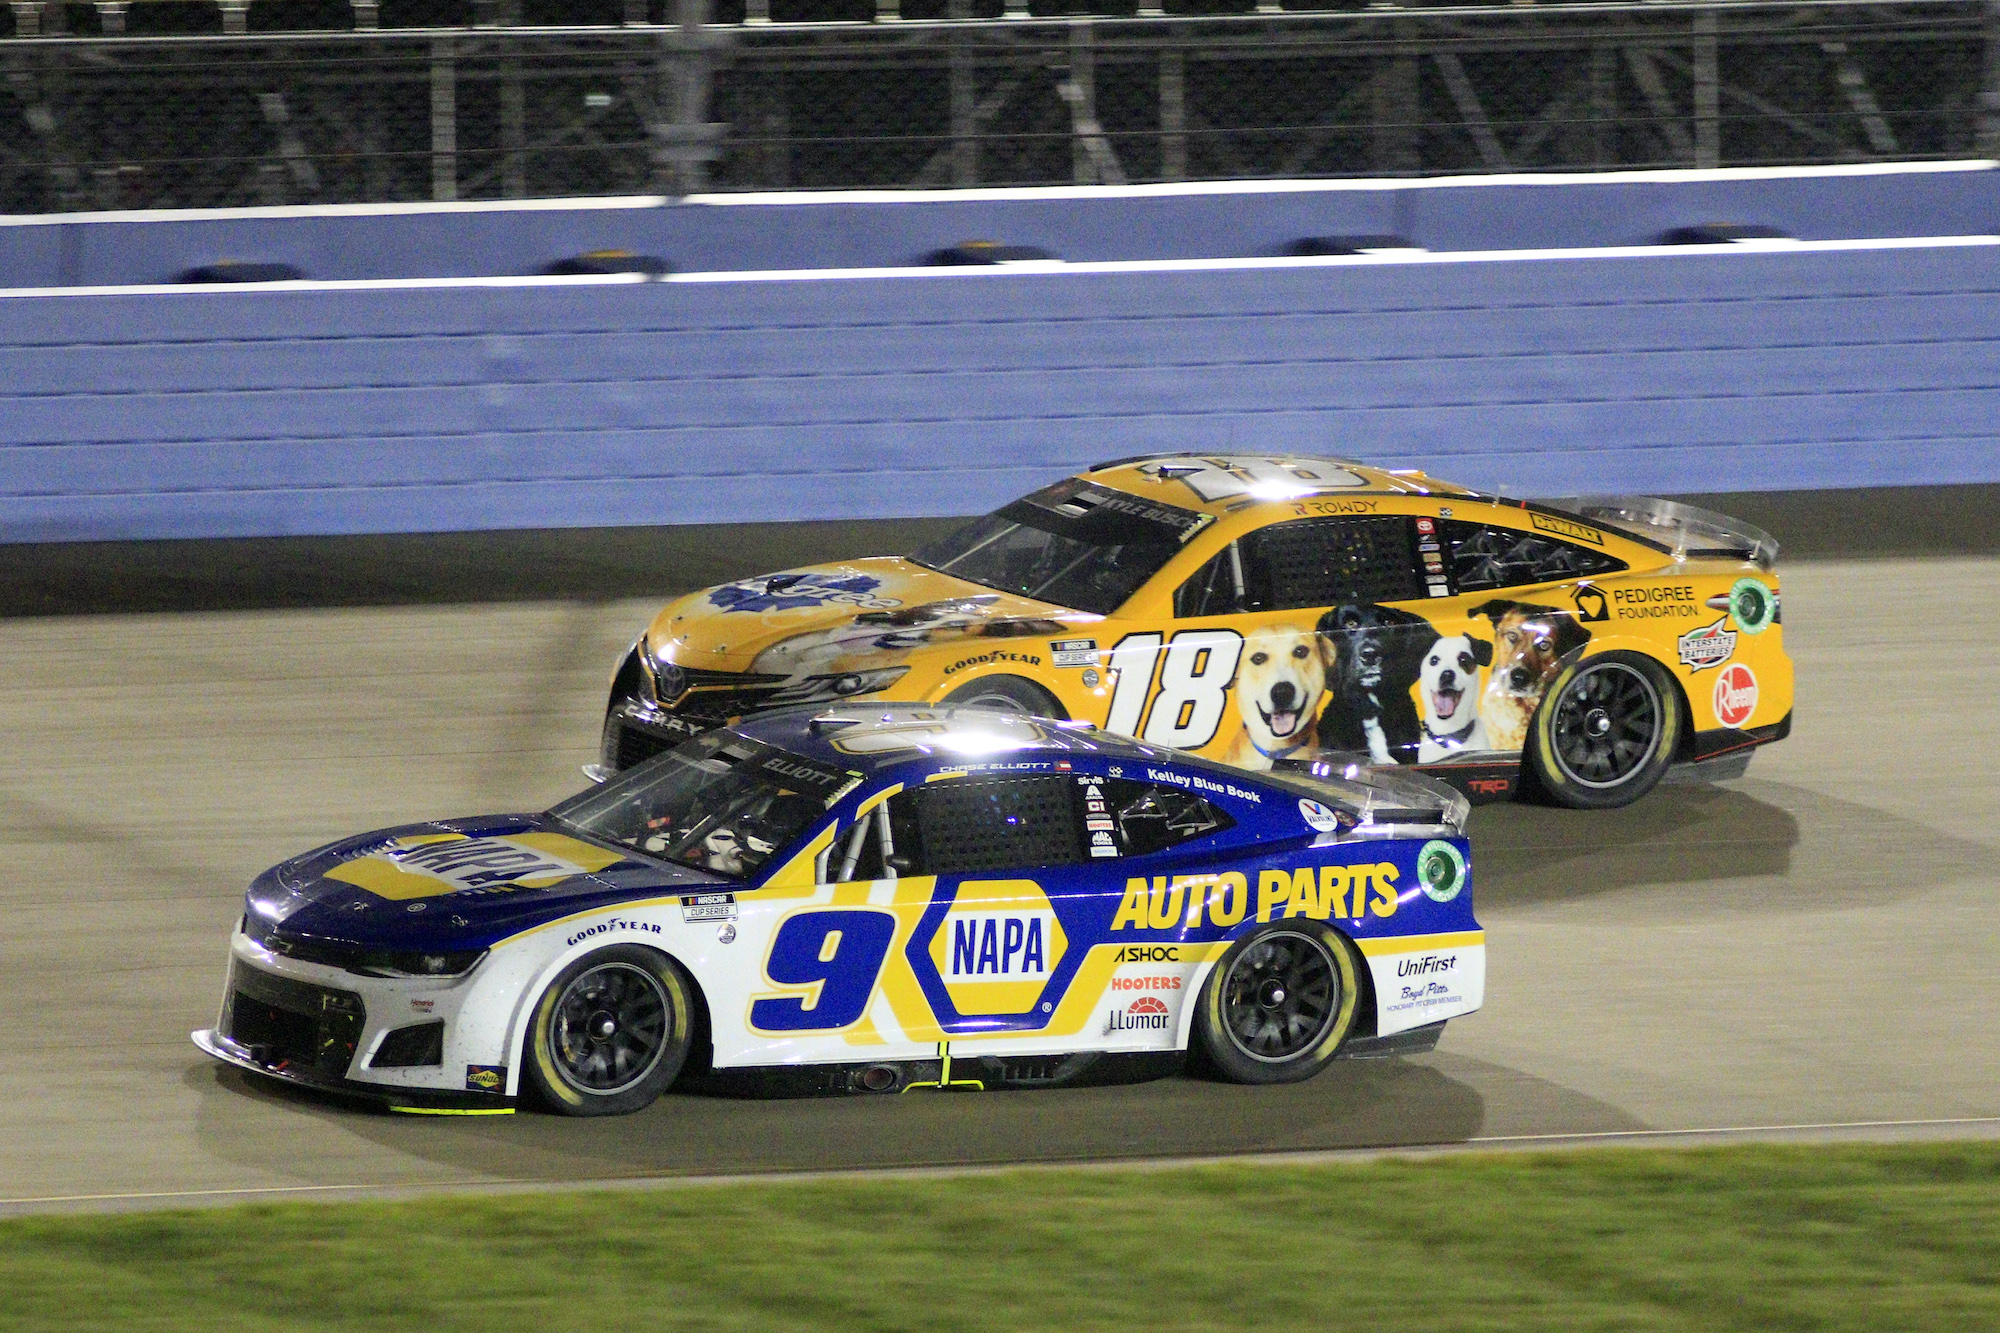 Chase Elliott Is Favorite Driver and NASCAR Proved It Late When Failing to Follow Its Own Safety Guidelines and Put Out a Caution That Might Have Changed the Final Result